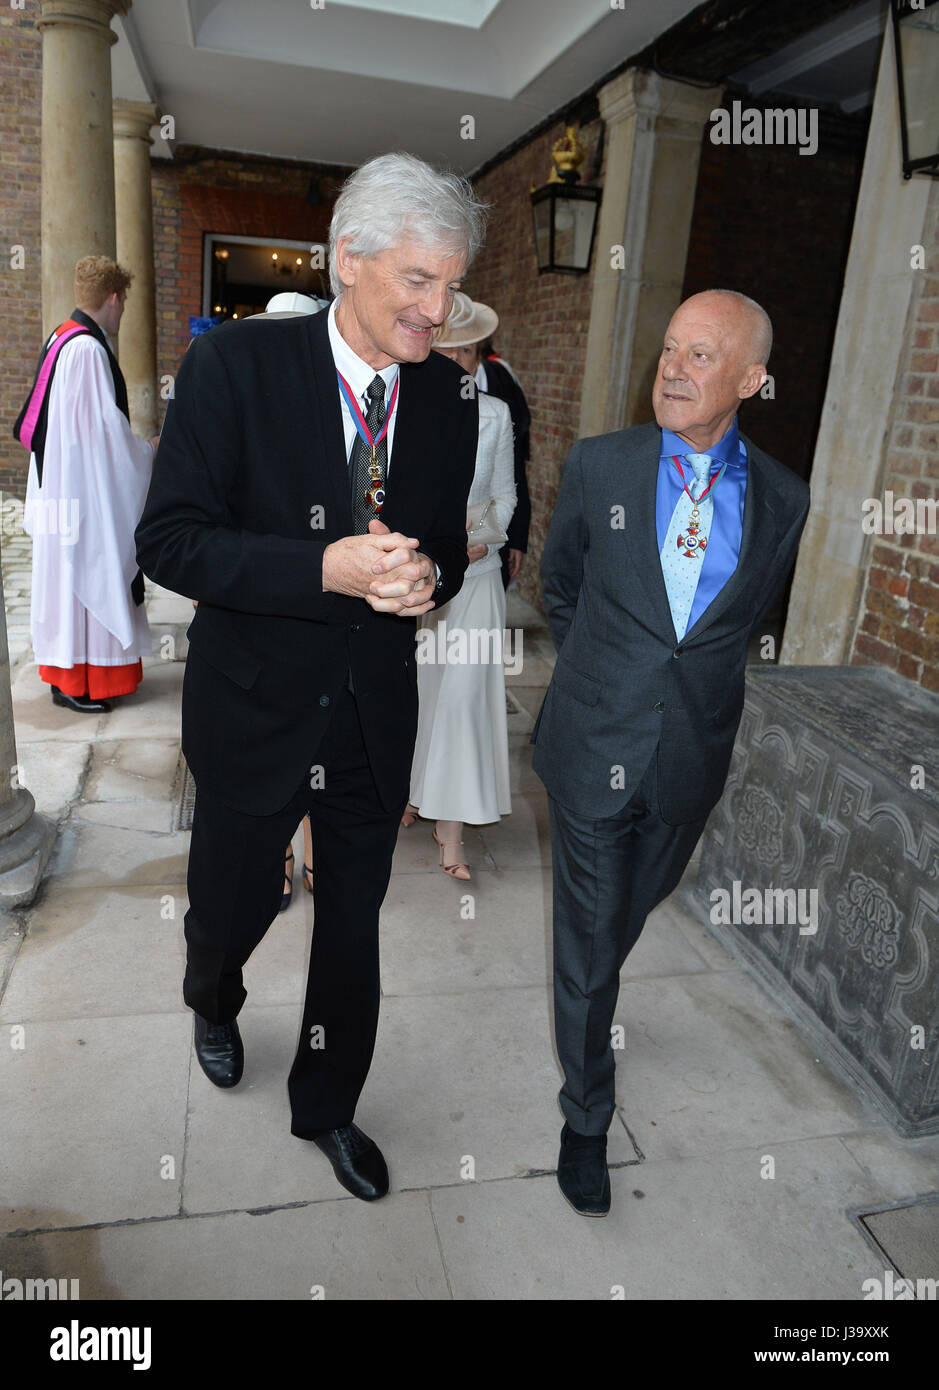 Sir James Dyson (left) and Lord Foster of Thames Bank arriving at Chapel Royal in St James's Palace, London, for an Order of Merit service. Stock Photo